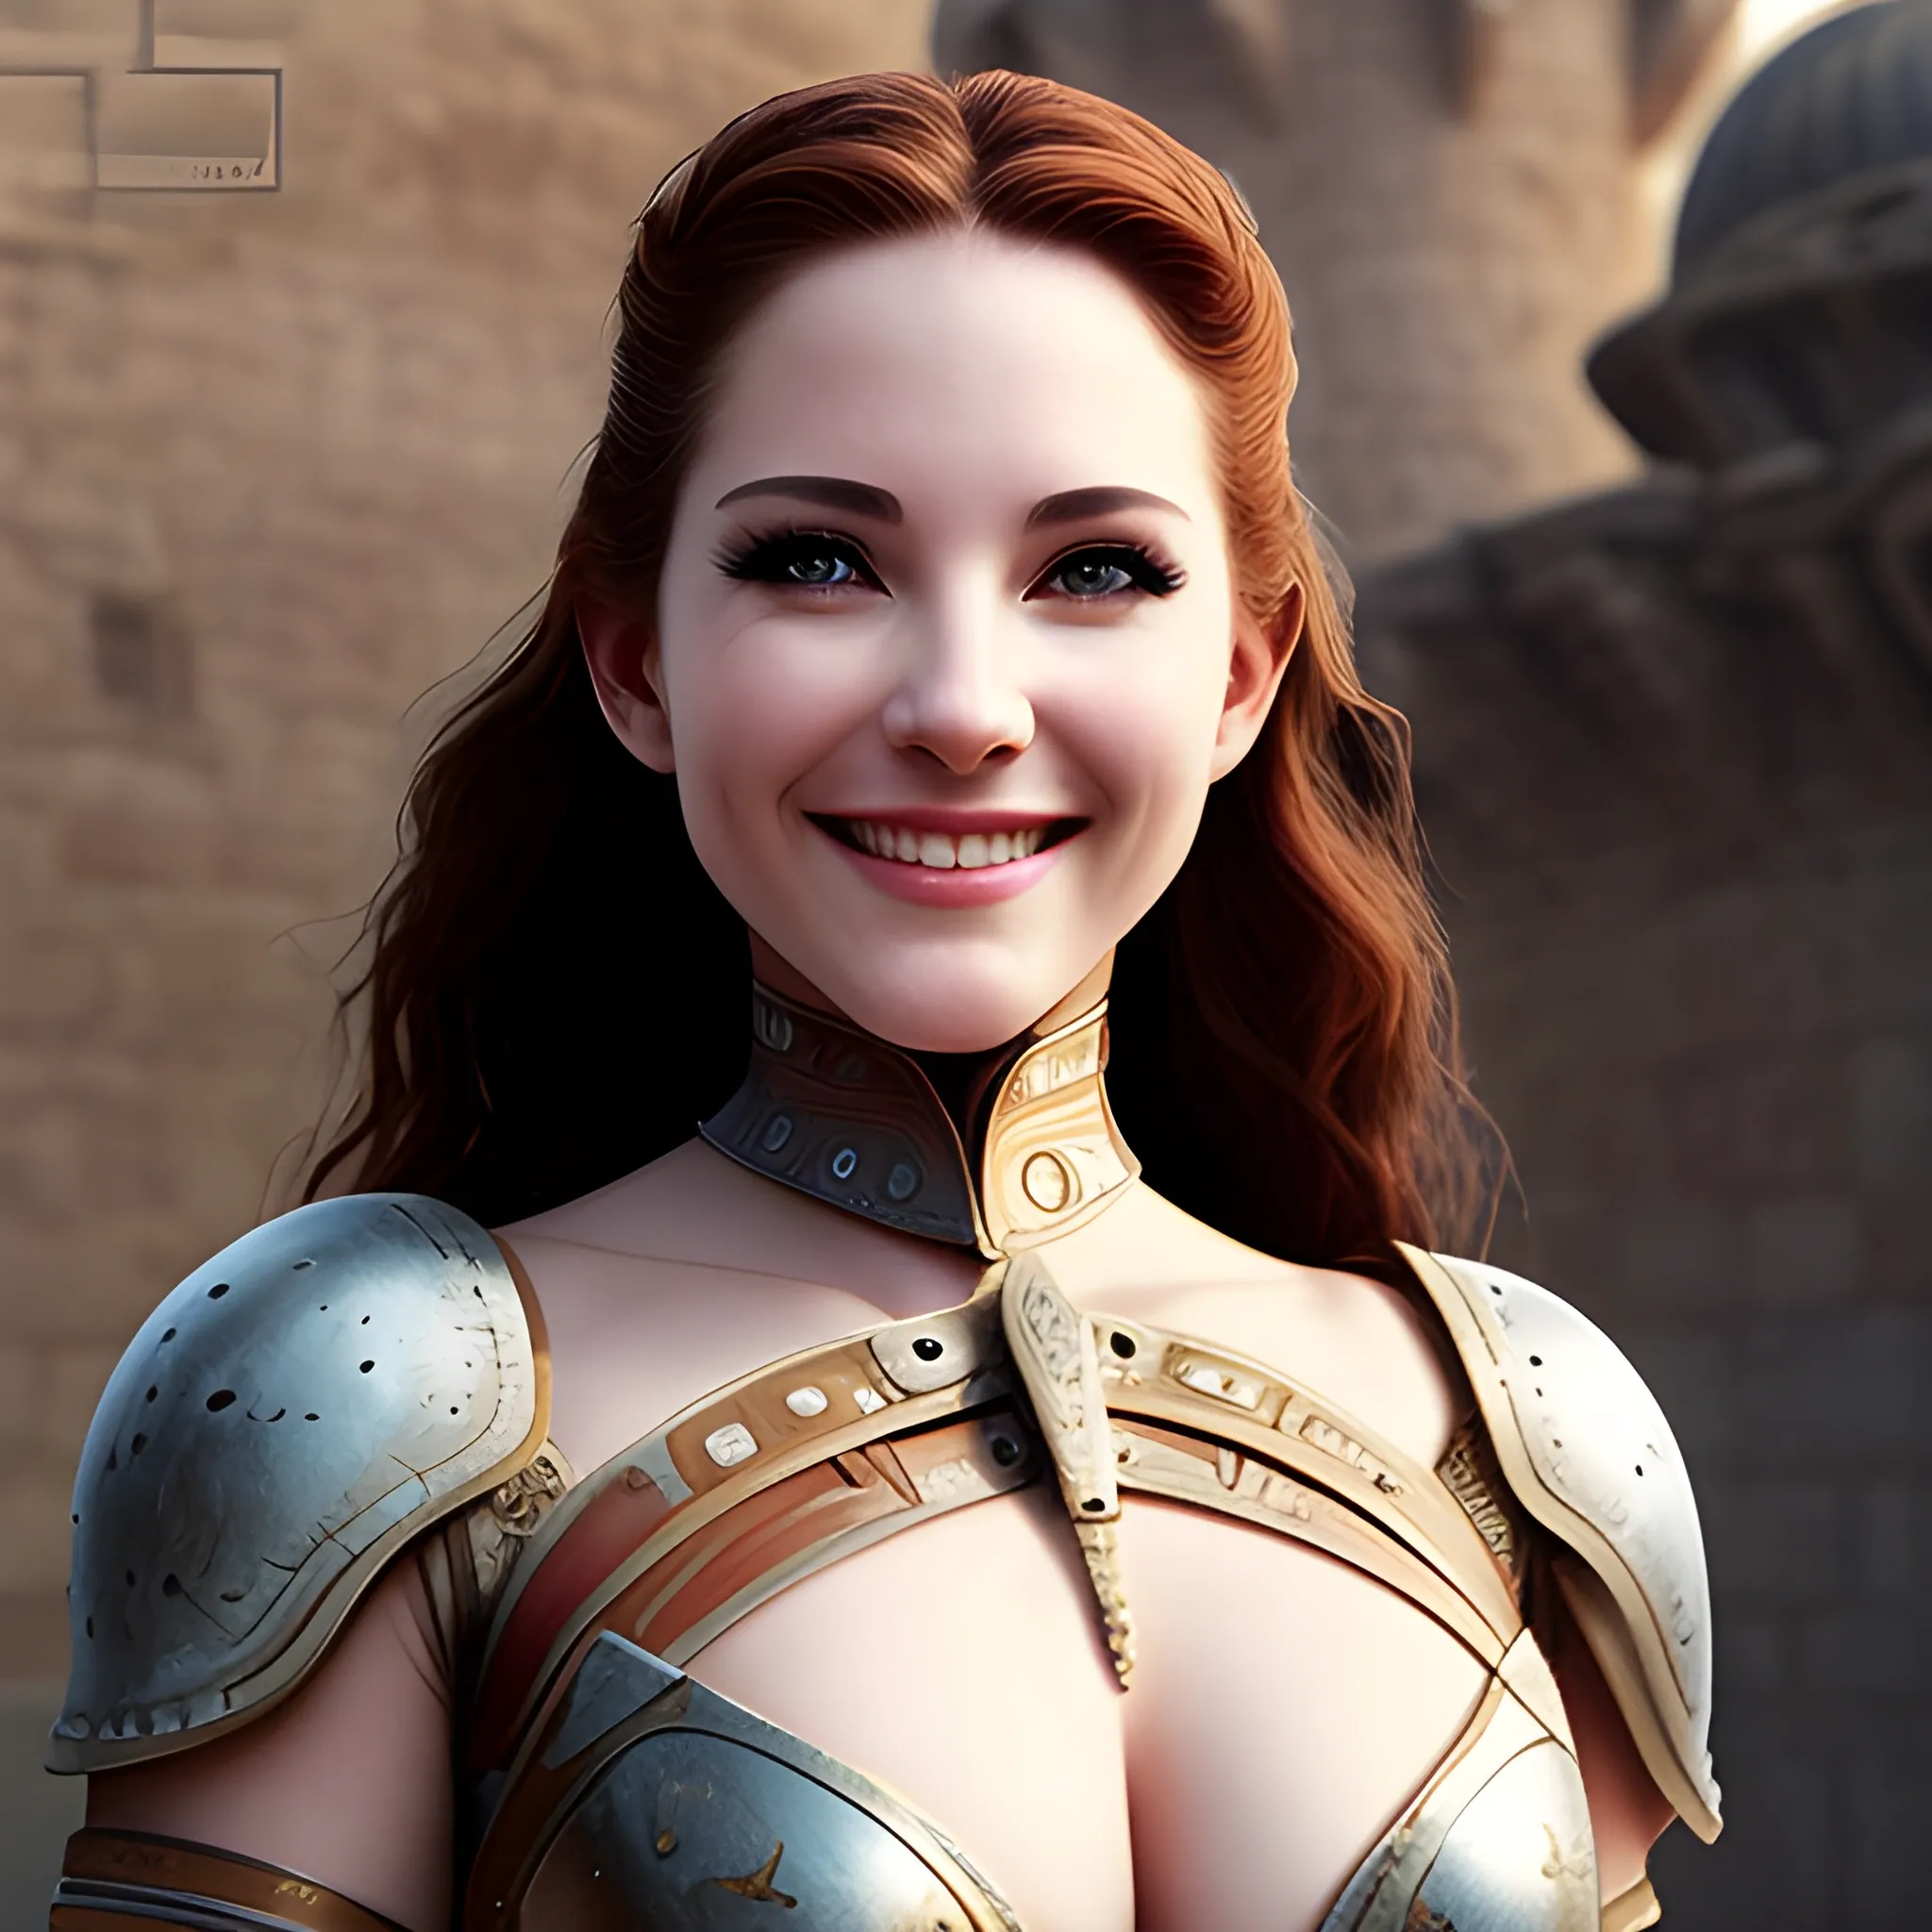 Beauty, Gladiator, Castle, Science Fiction, Classical, Beautiful Nose, breast, whip，body，facing me， kind smile